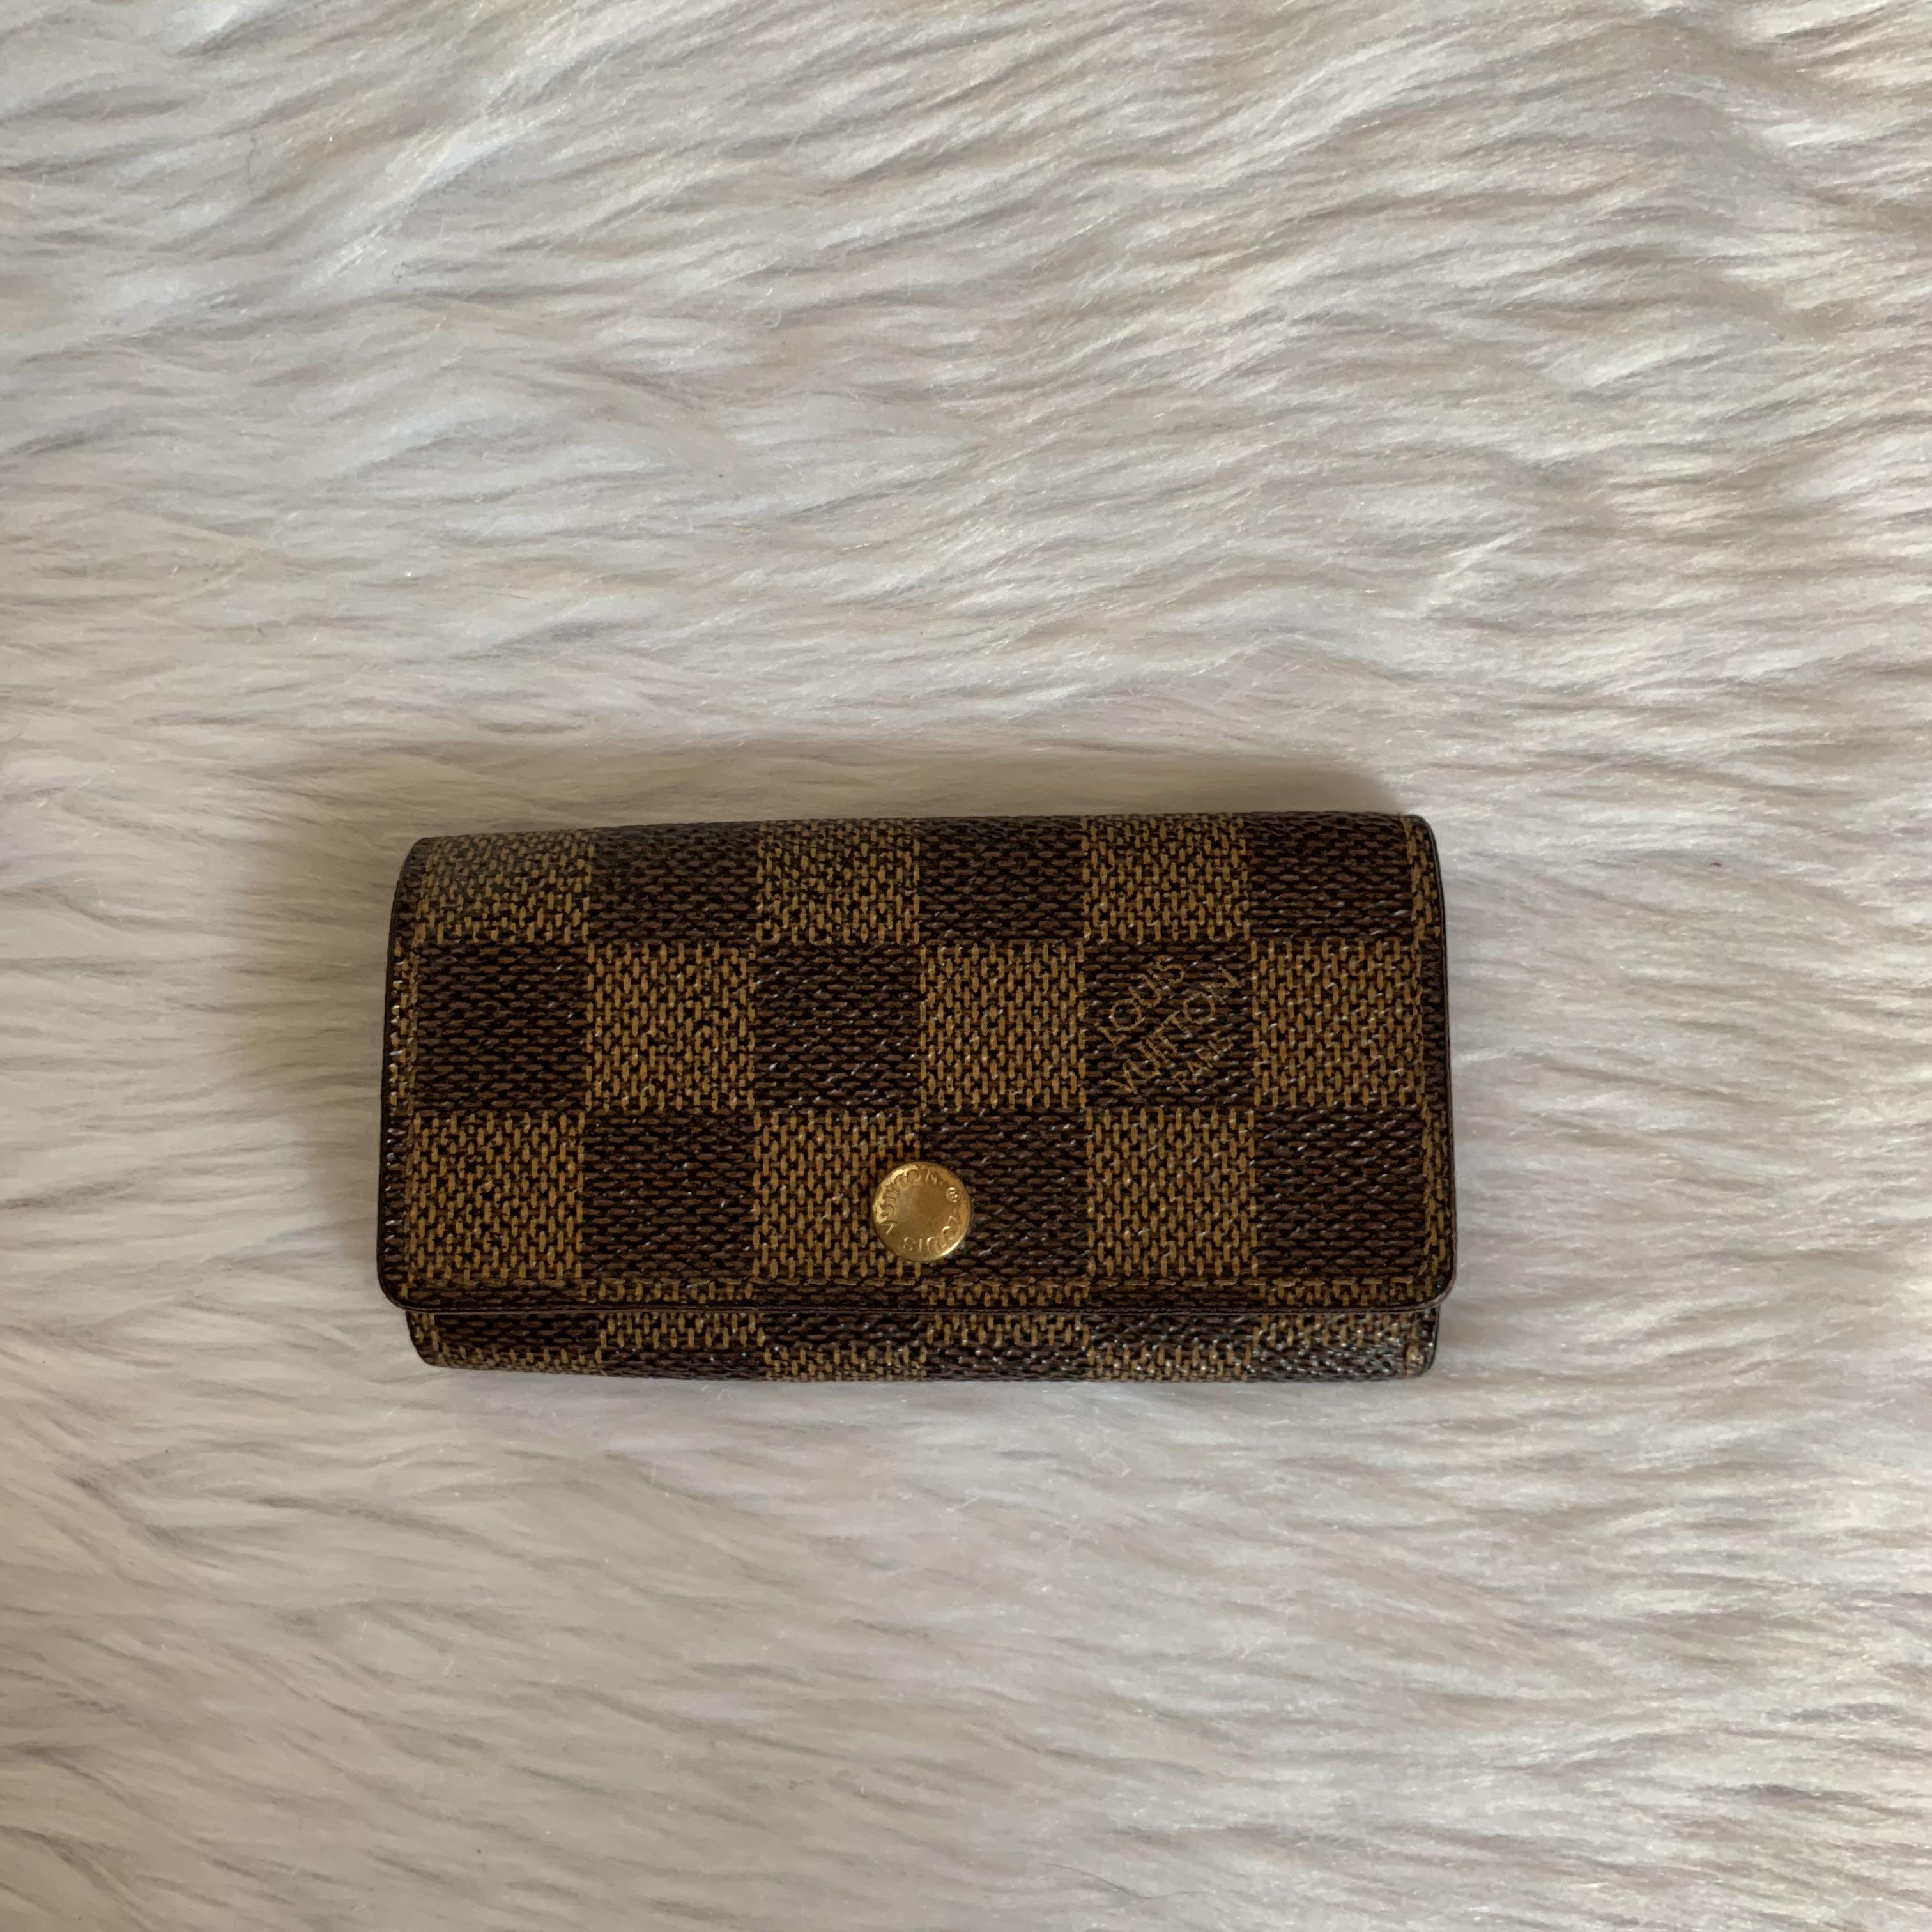 Authentic Pre Loved Louis Vuitton Key Holder